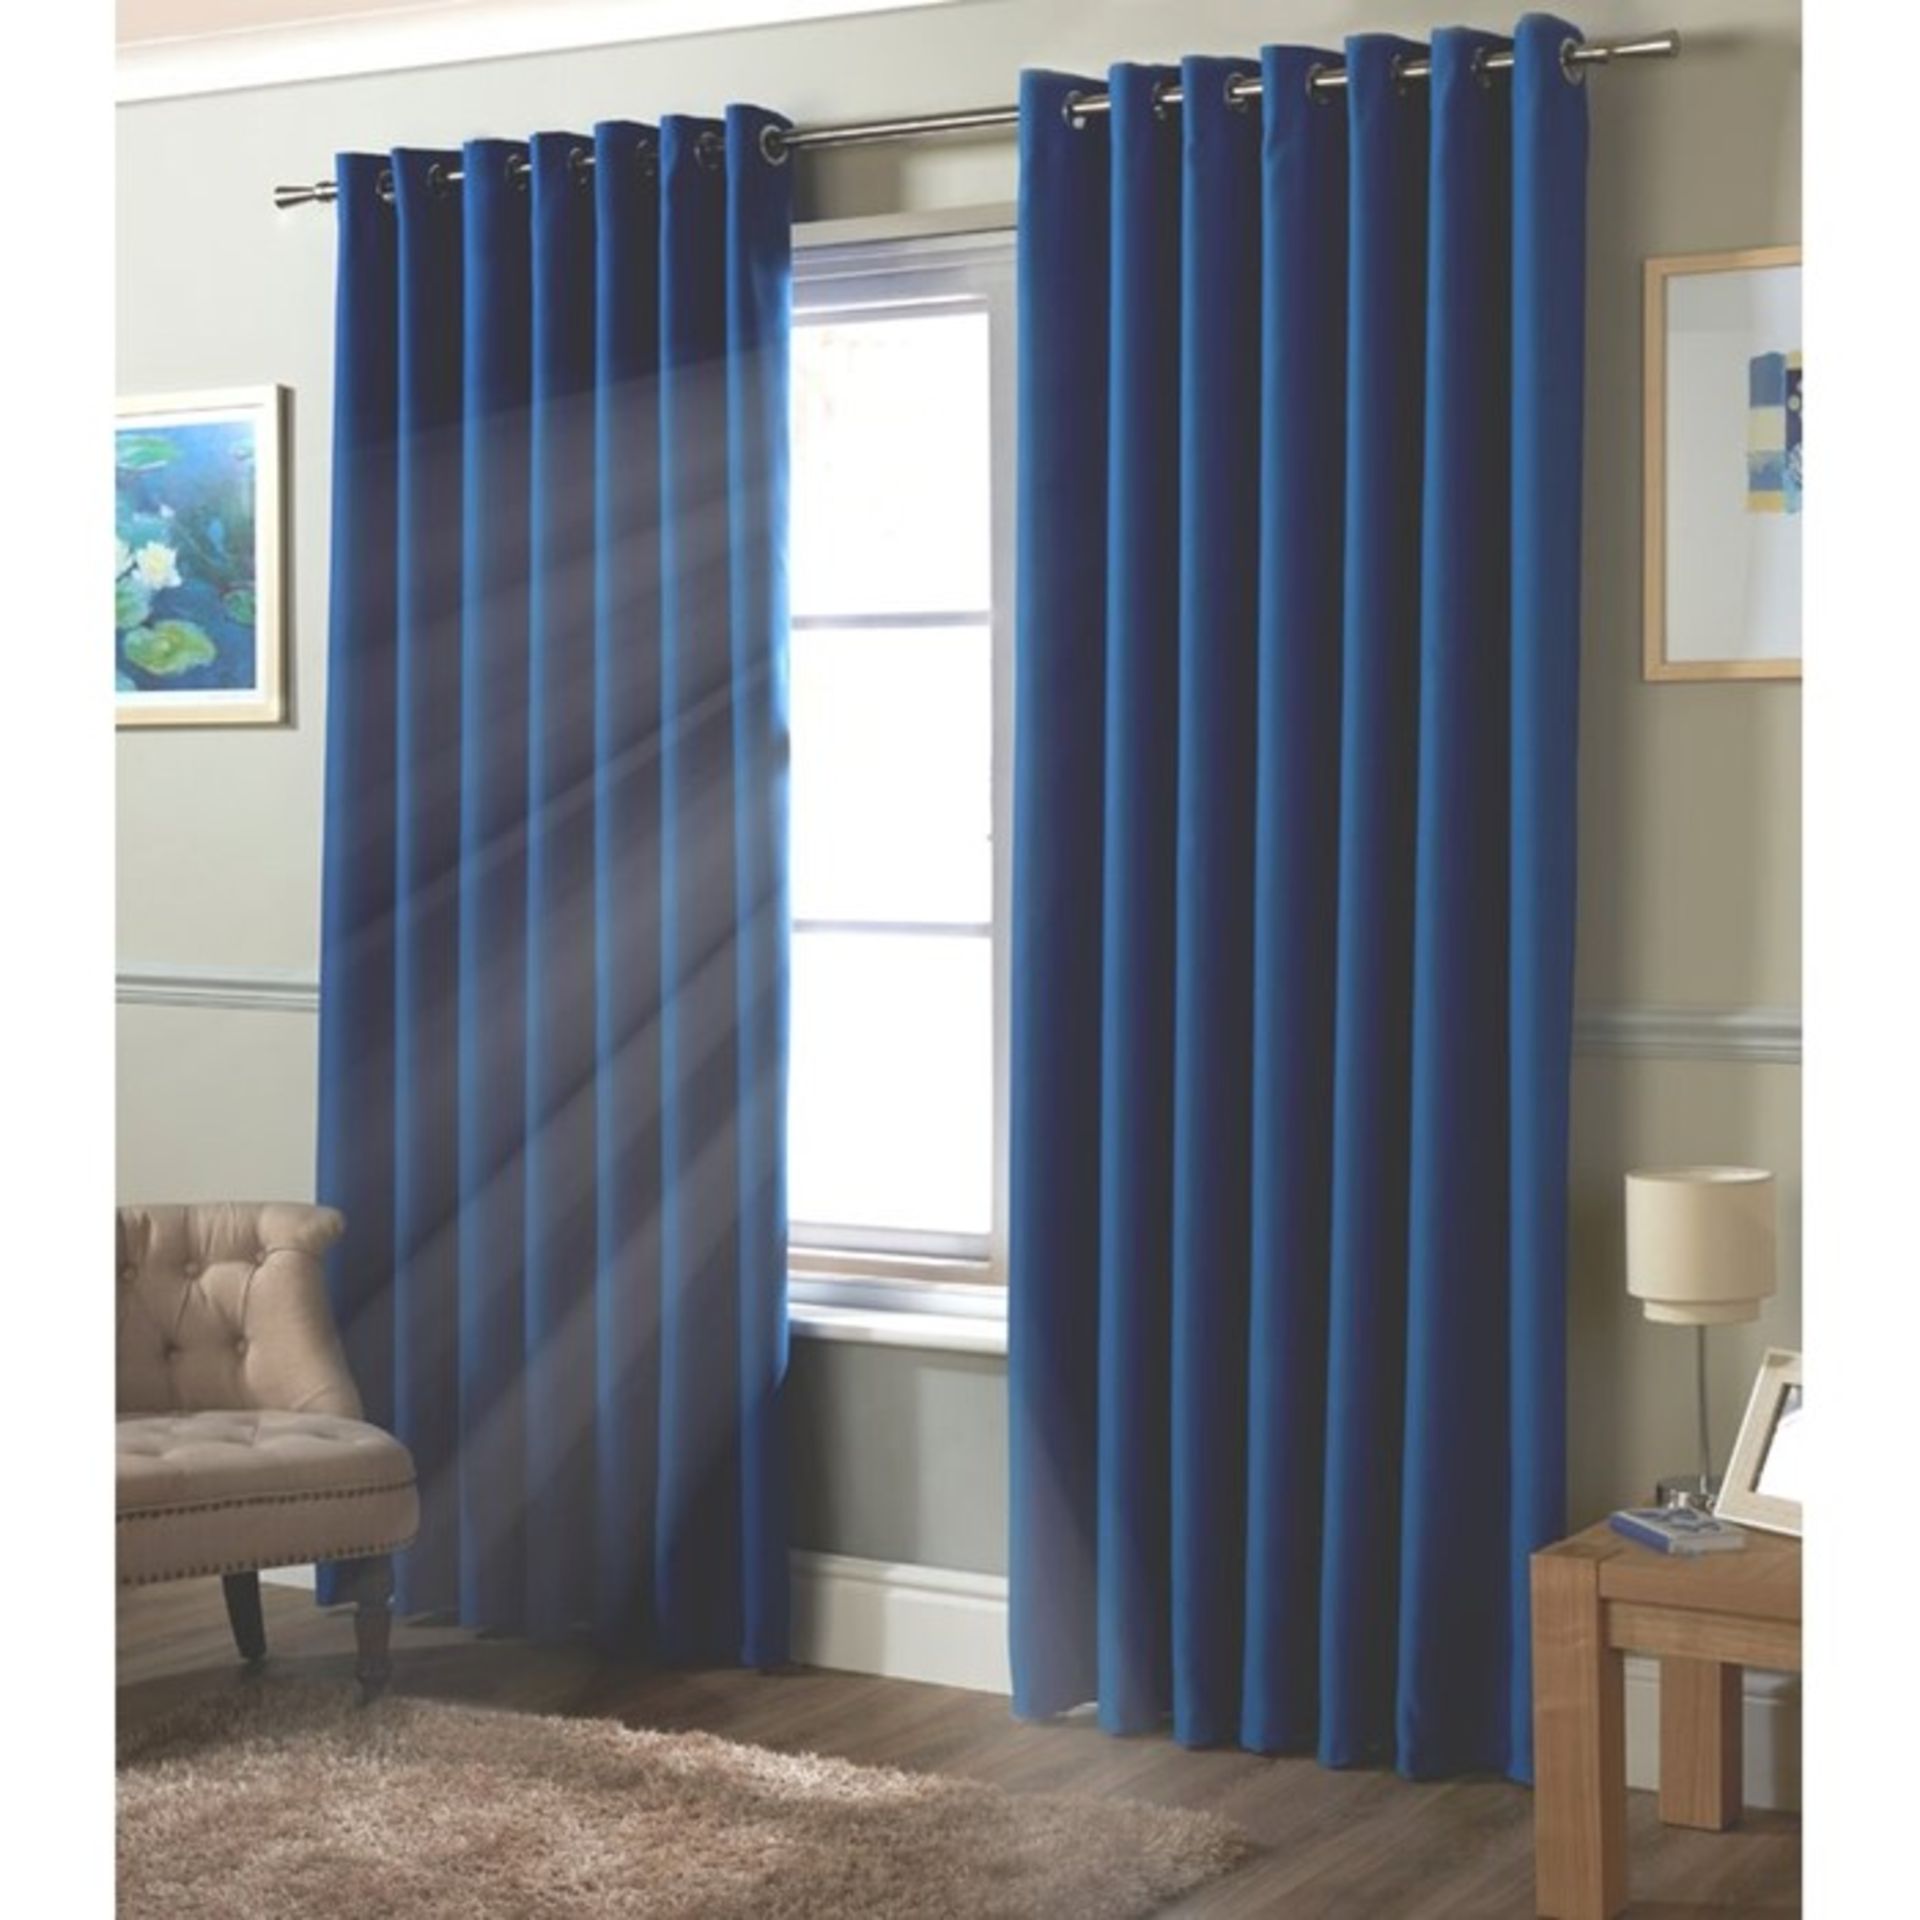 Marlow Home Co., Strome Eyelet Room Darkening Thermal Curtains (Set of 2)(DIFFERENT SIZES)(